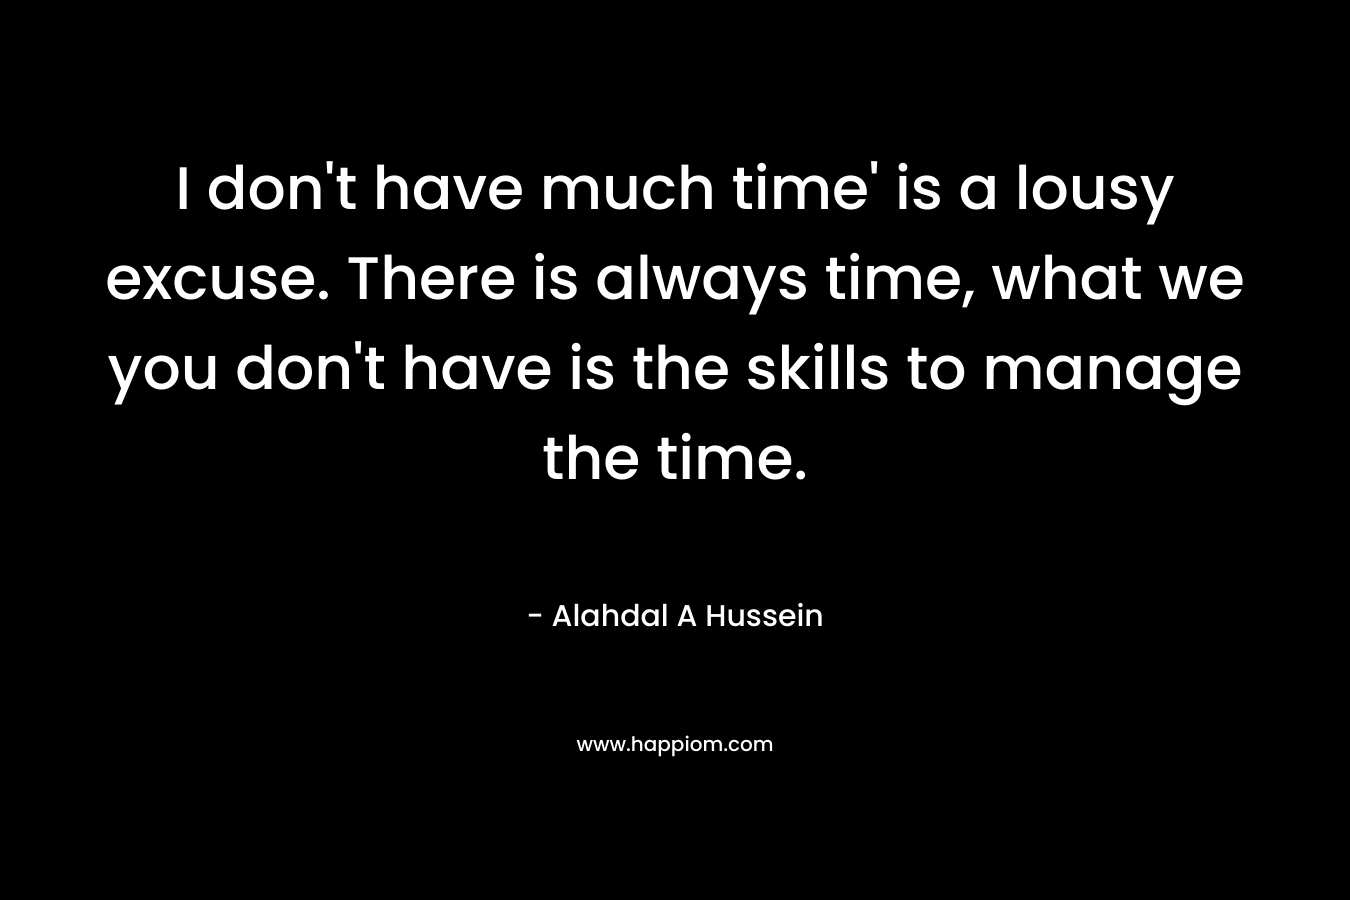 I don’t have much time’ is a lousy excuse. There is always time, what we you don’t have is the skills to manage the time. – Alahdal A Hussein